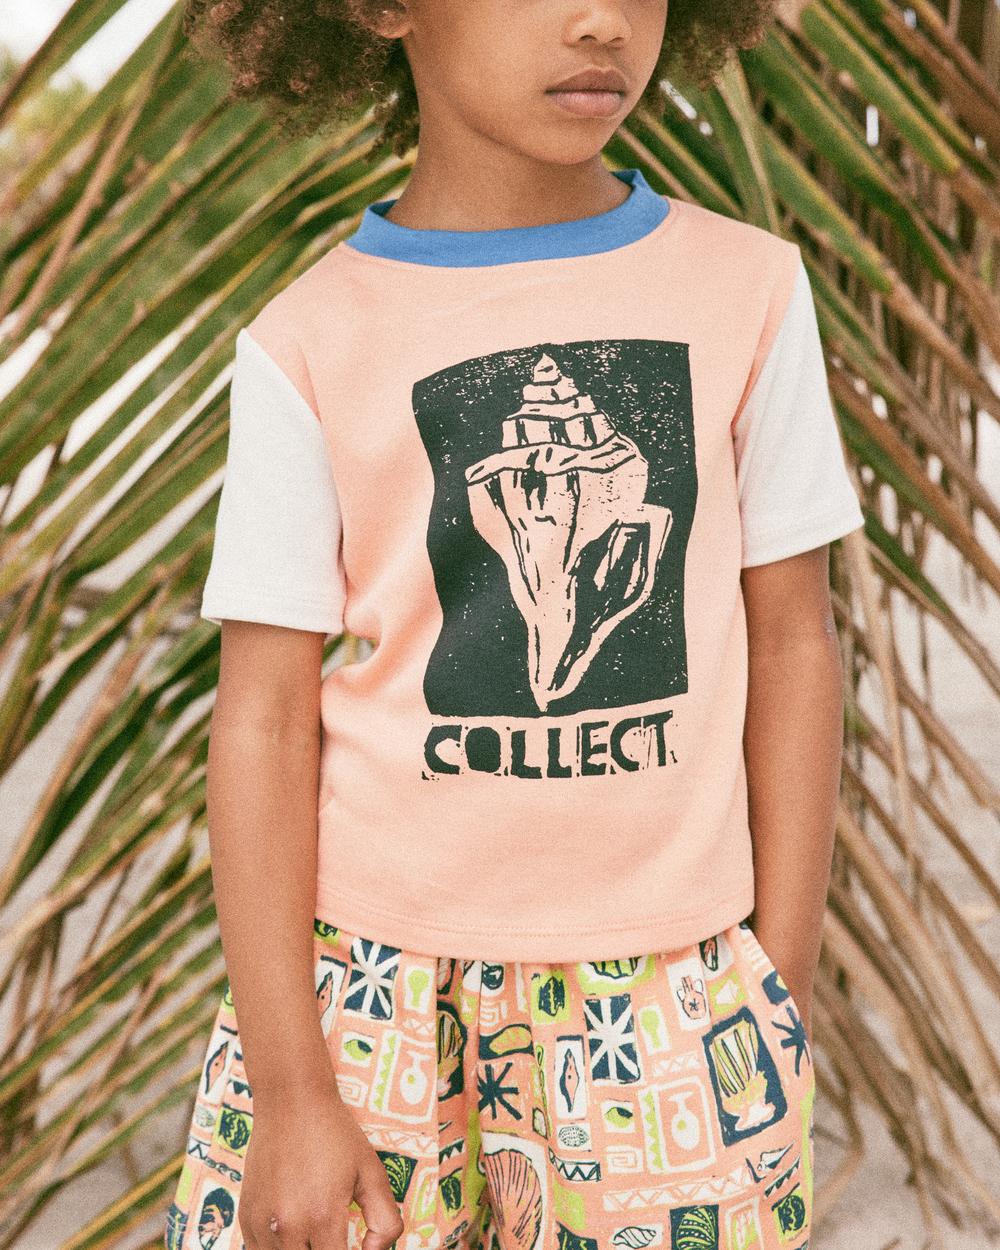 Collect Ringer Tee